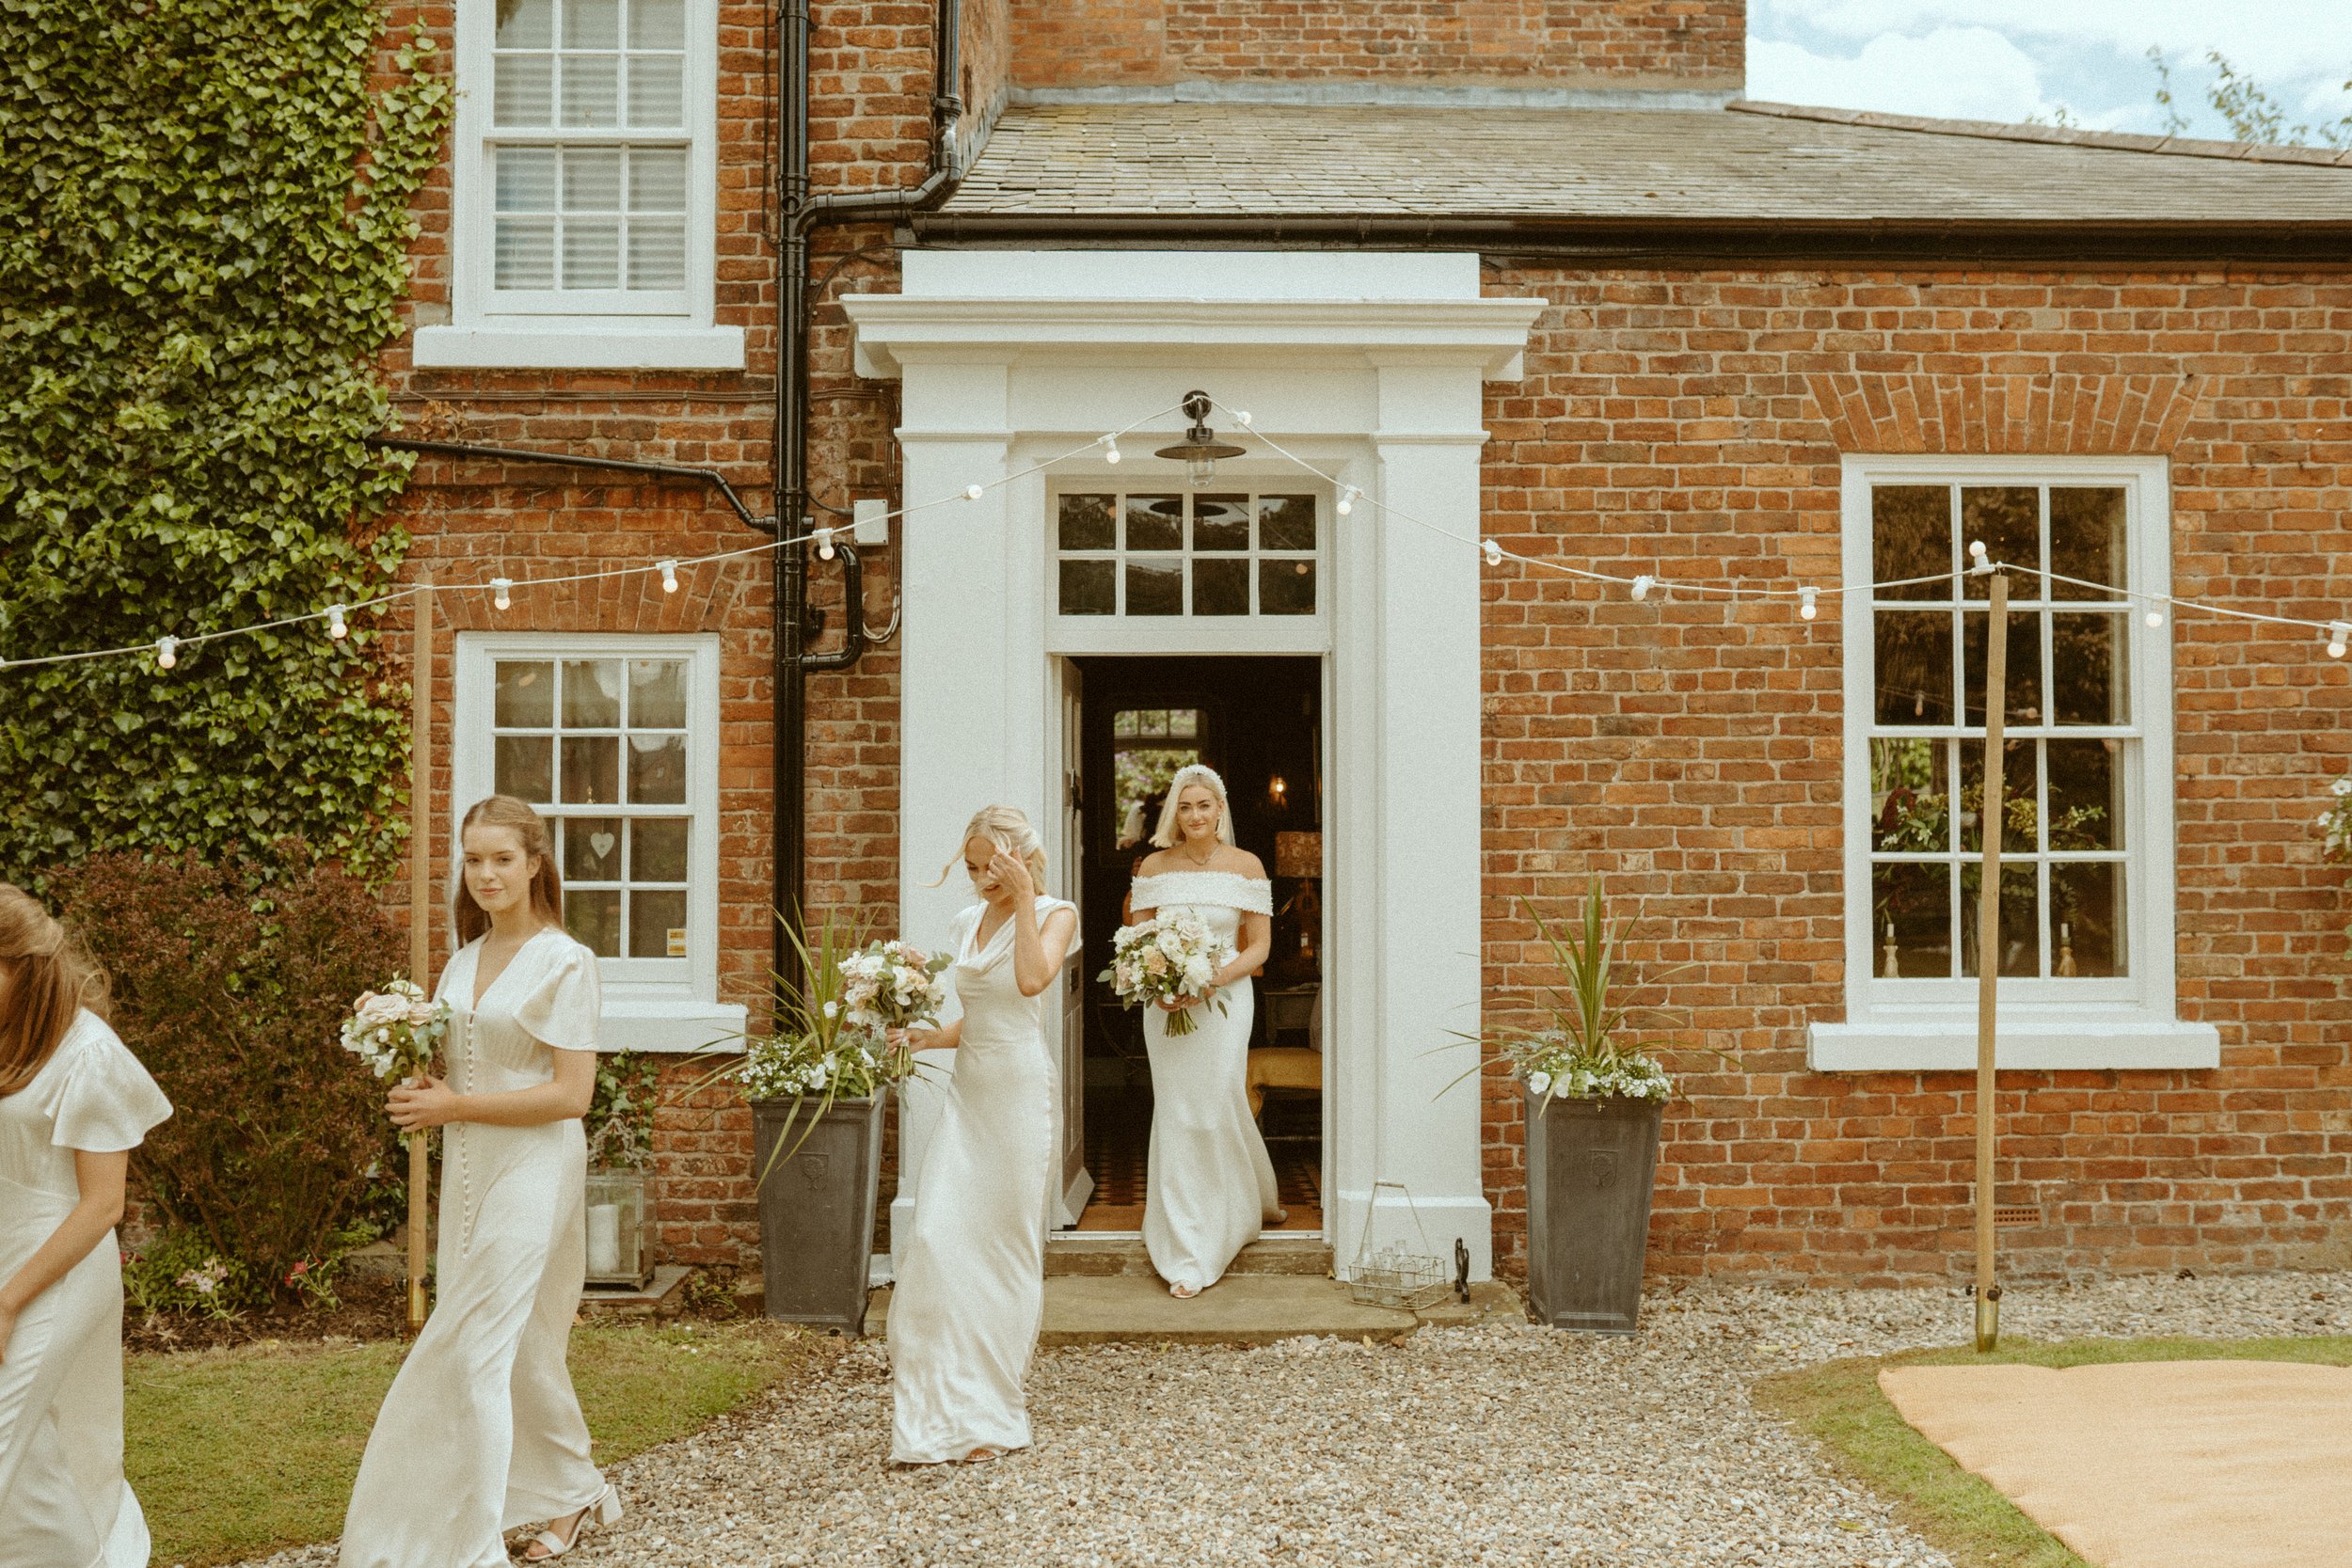 Marquee-Wedding-Cheshire-Bridal-Party.jpg